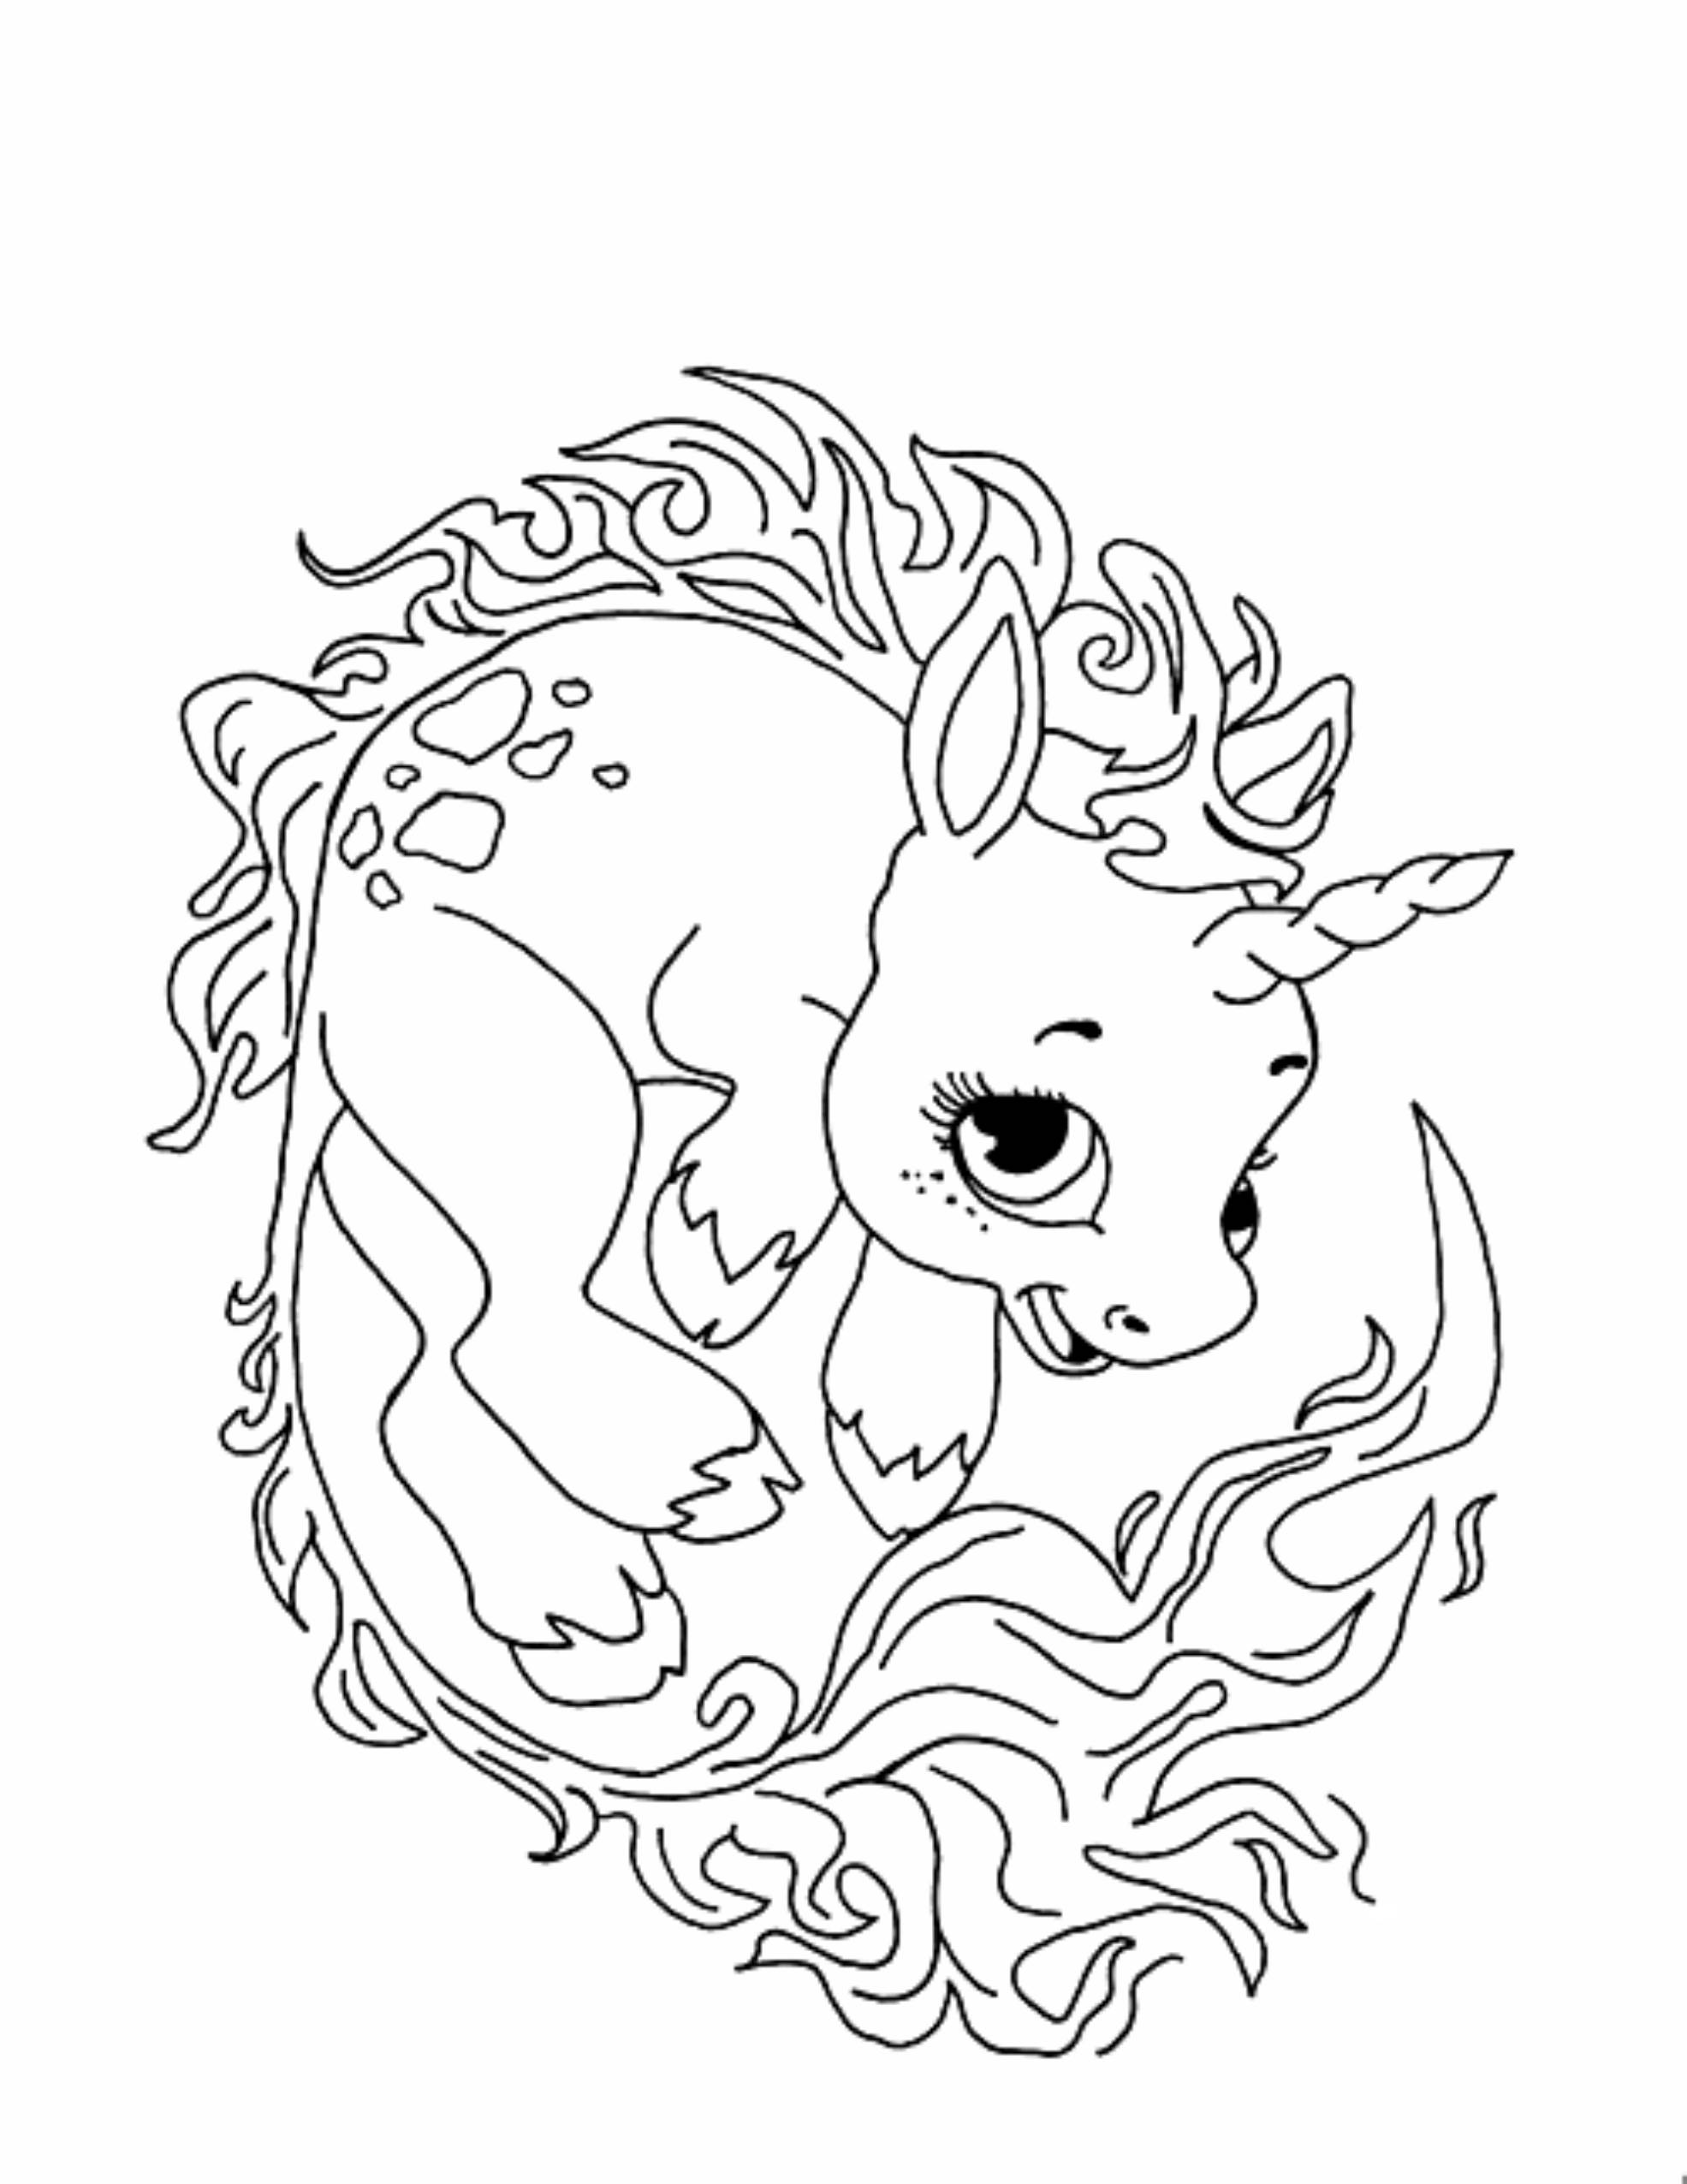 Free Printable Coloring Pages Unicorn, Download Free Printable ...